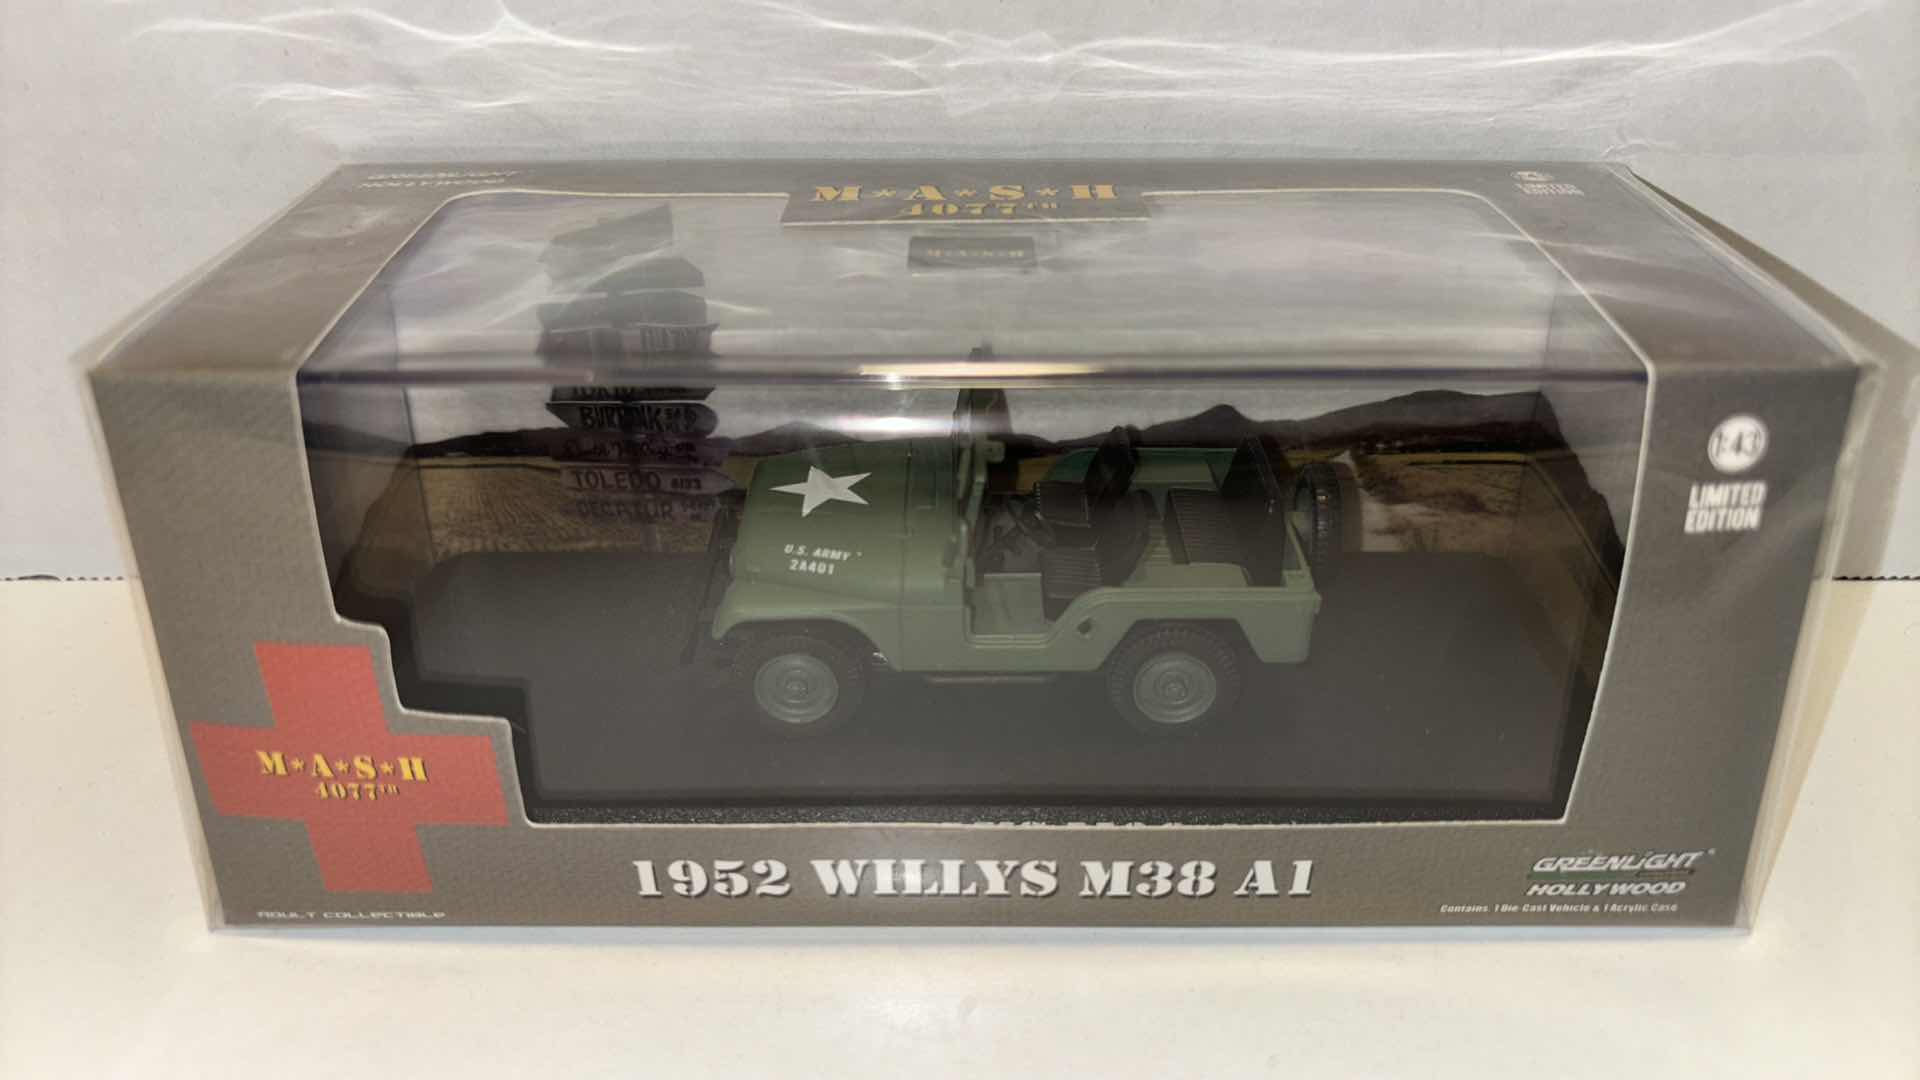 Photo 3 of NEW GREENLIGHT COLLECTIBLES HOLLYWOOD 1:43 DIE-CAST VEHICLE, “MASH 4077TH 1952 WILLYS M38 A1 JEEP” 2-PACK